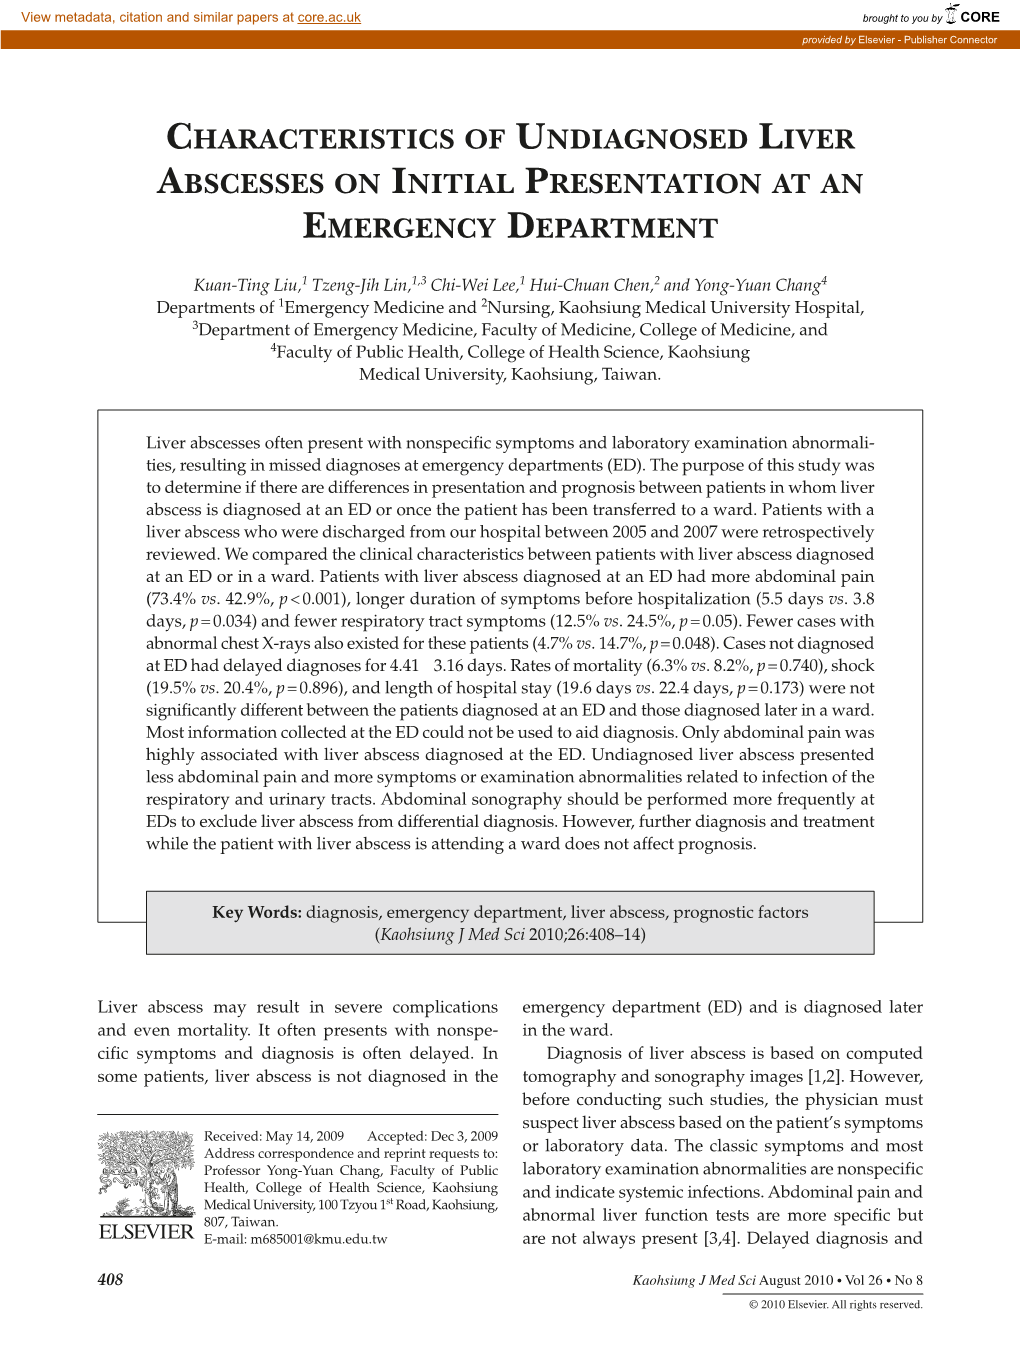 Characteristics of Undiagnosed Liver Abscesses on Initial Presentation at an Emergency Department